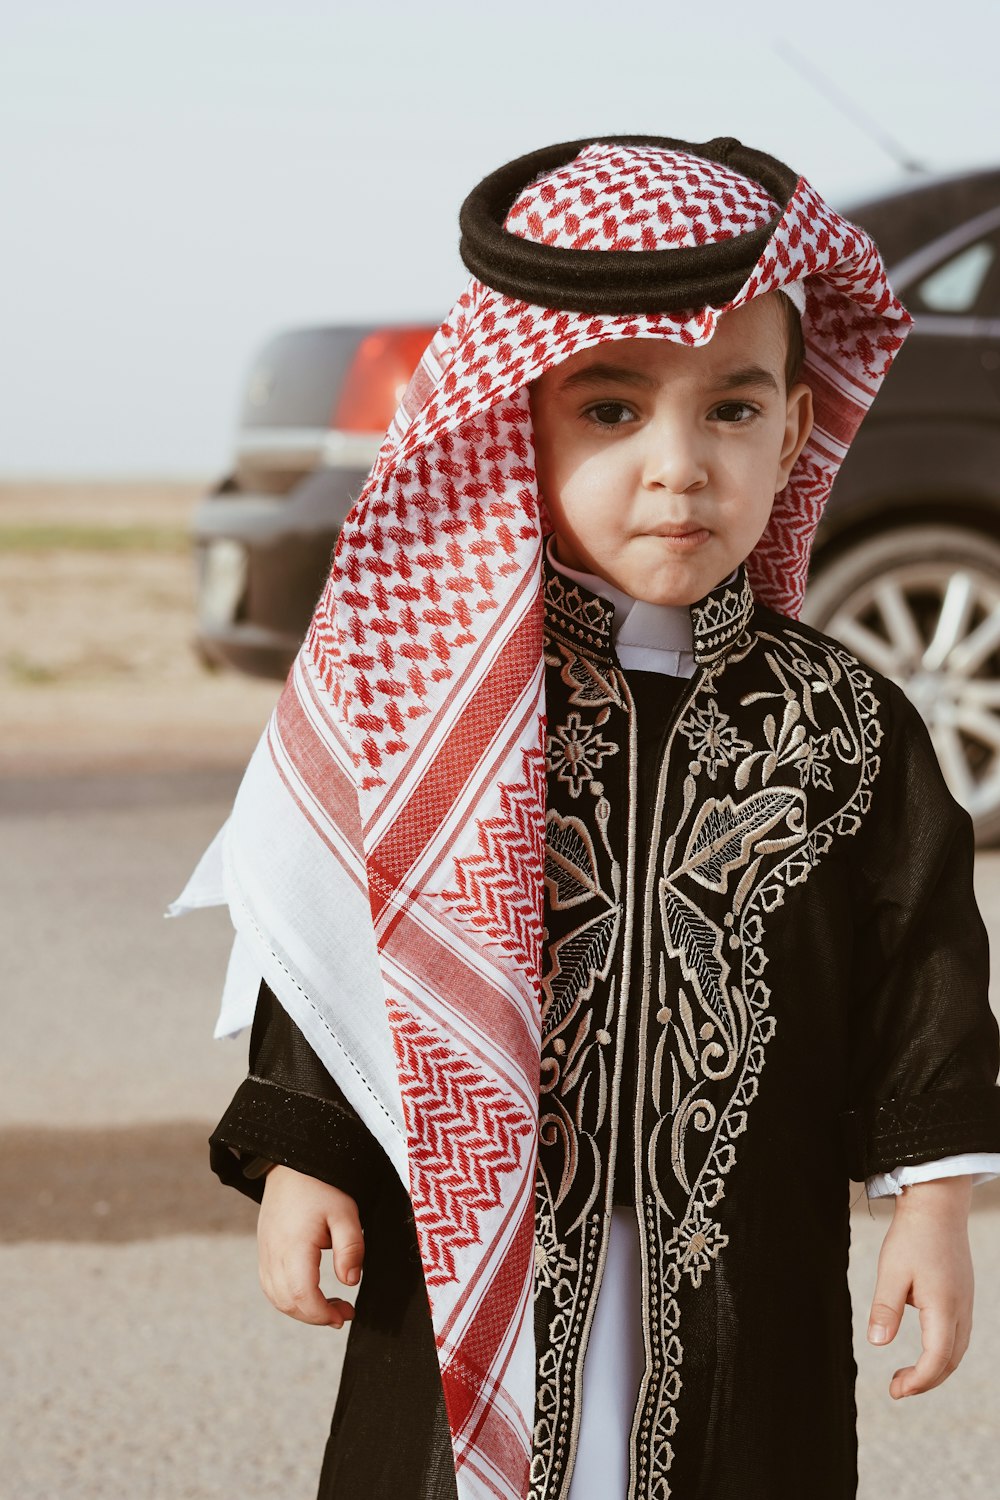 a young boy wearing a black and white outfit and a red and white scarf